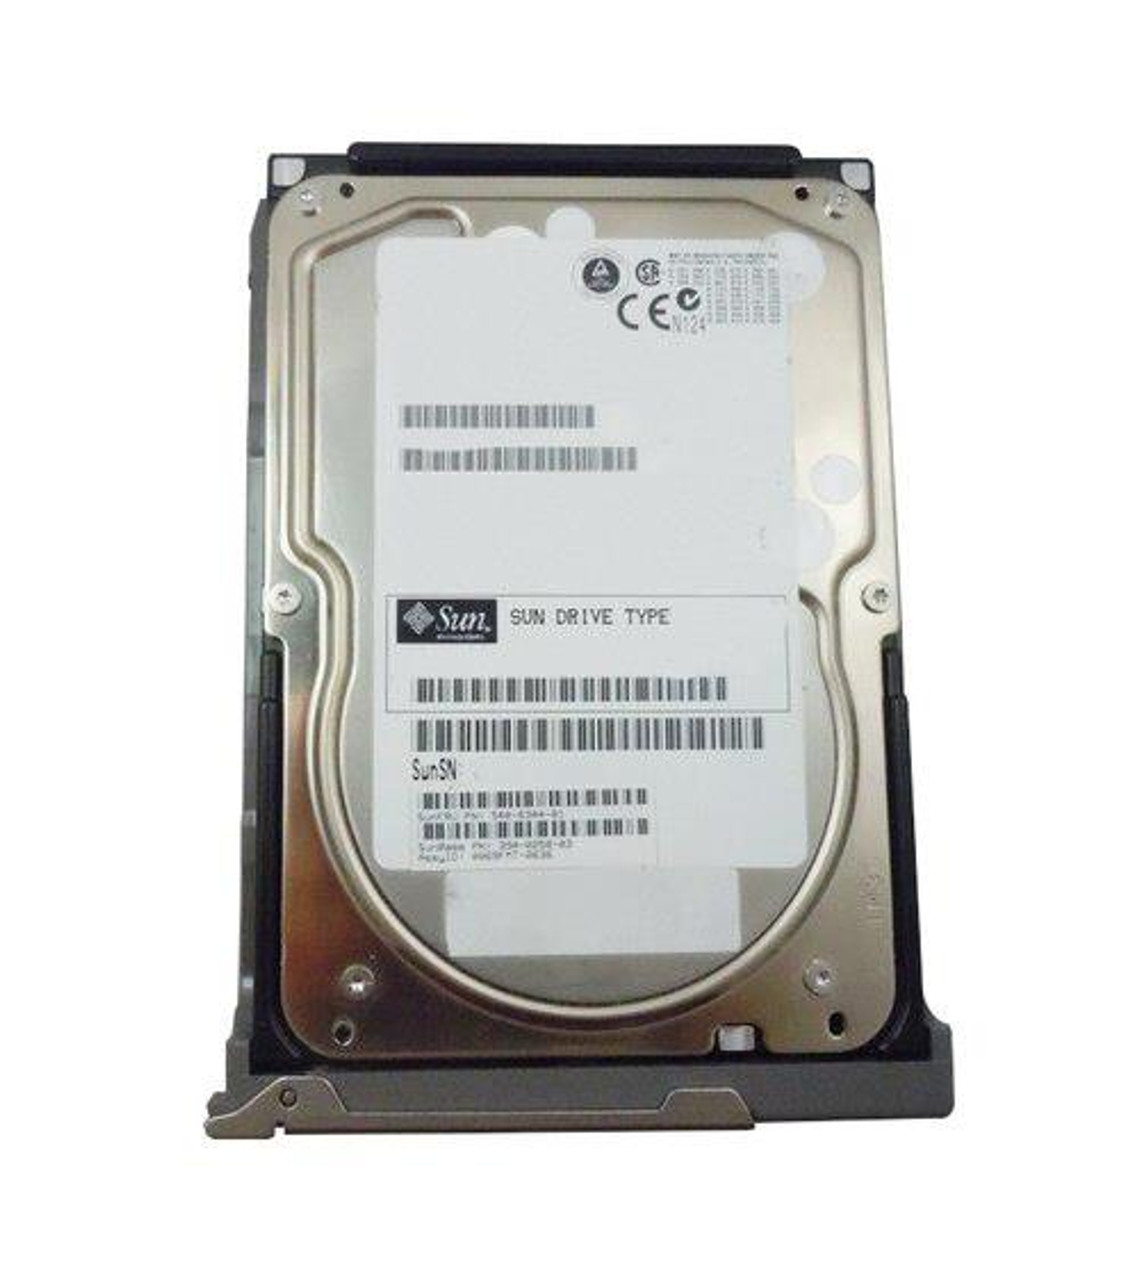 540-5629-N Sun 73GB 10000RPM Fibre Channel 2Gbps 3.5-inch Internal Hard Drive with Bracket for Fire and Blade Servers